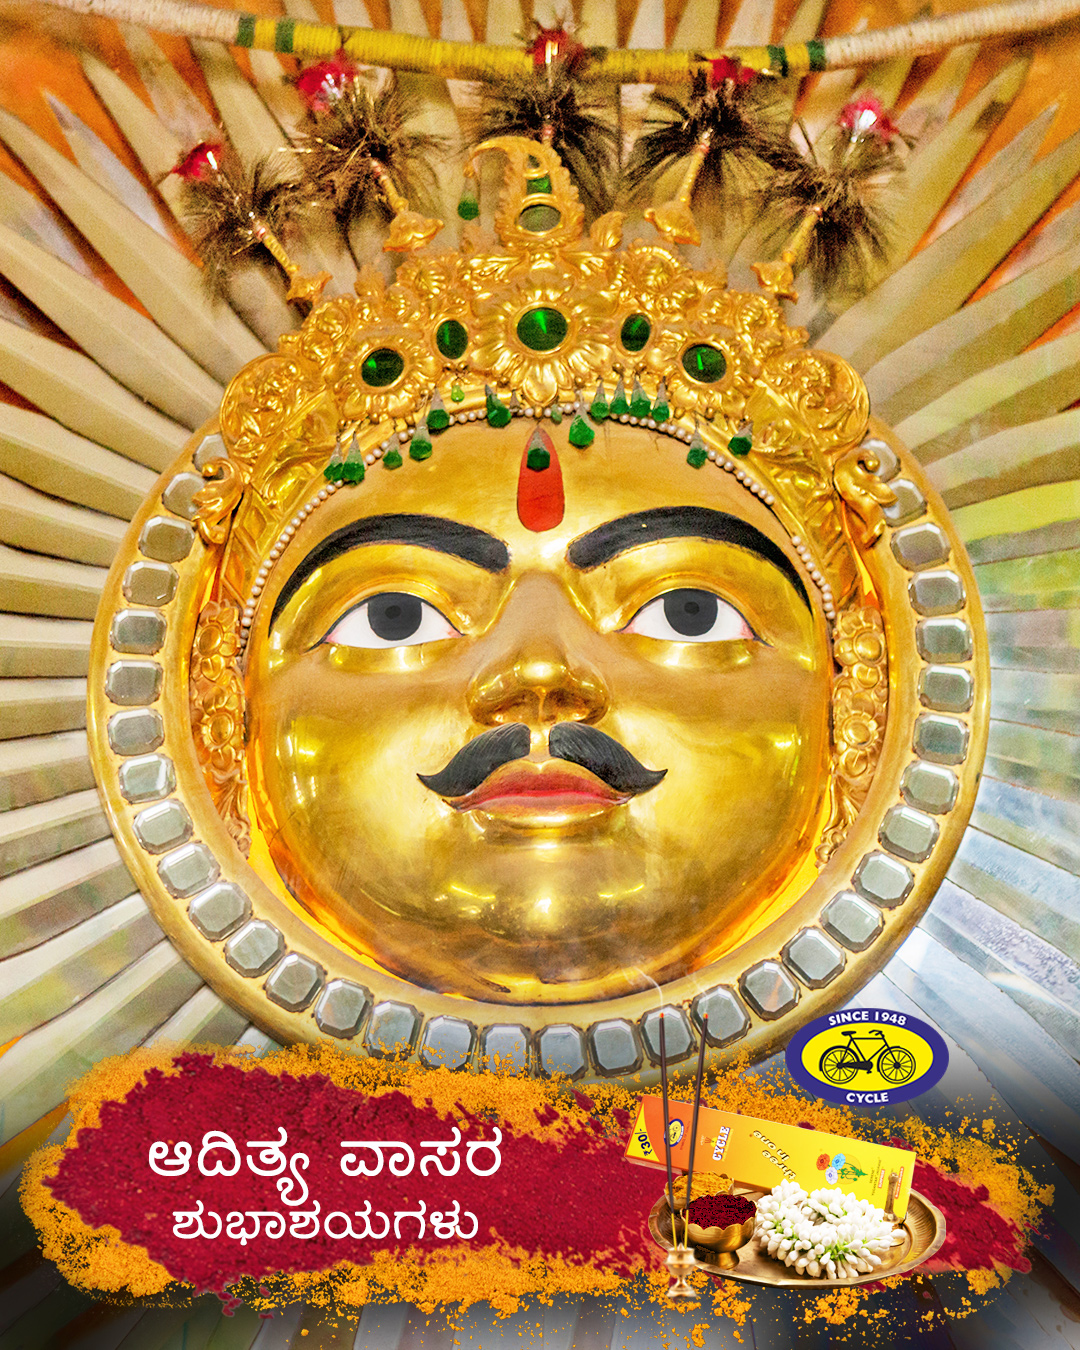 LORD SURYANARAYANA Images • Cycle.in (@cycledotin) on ShareChat